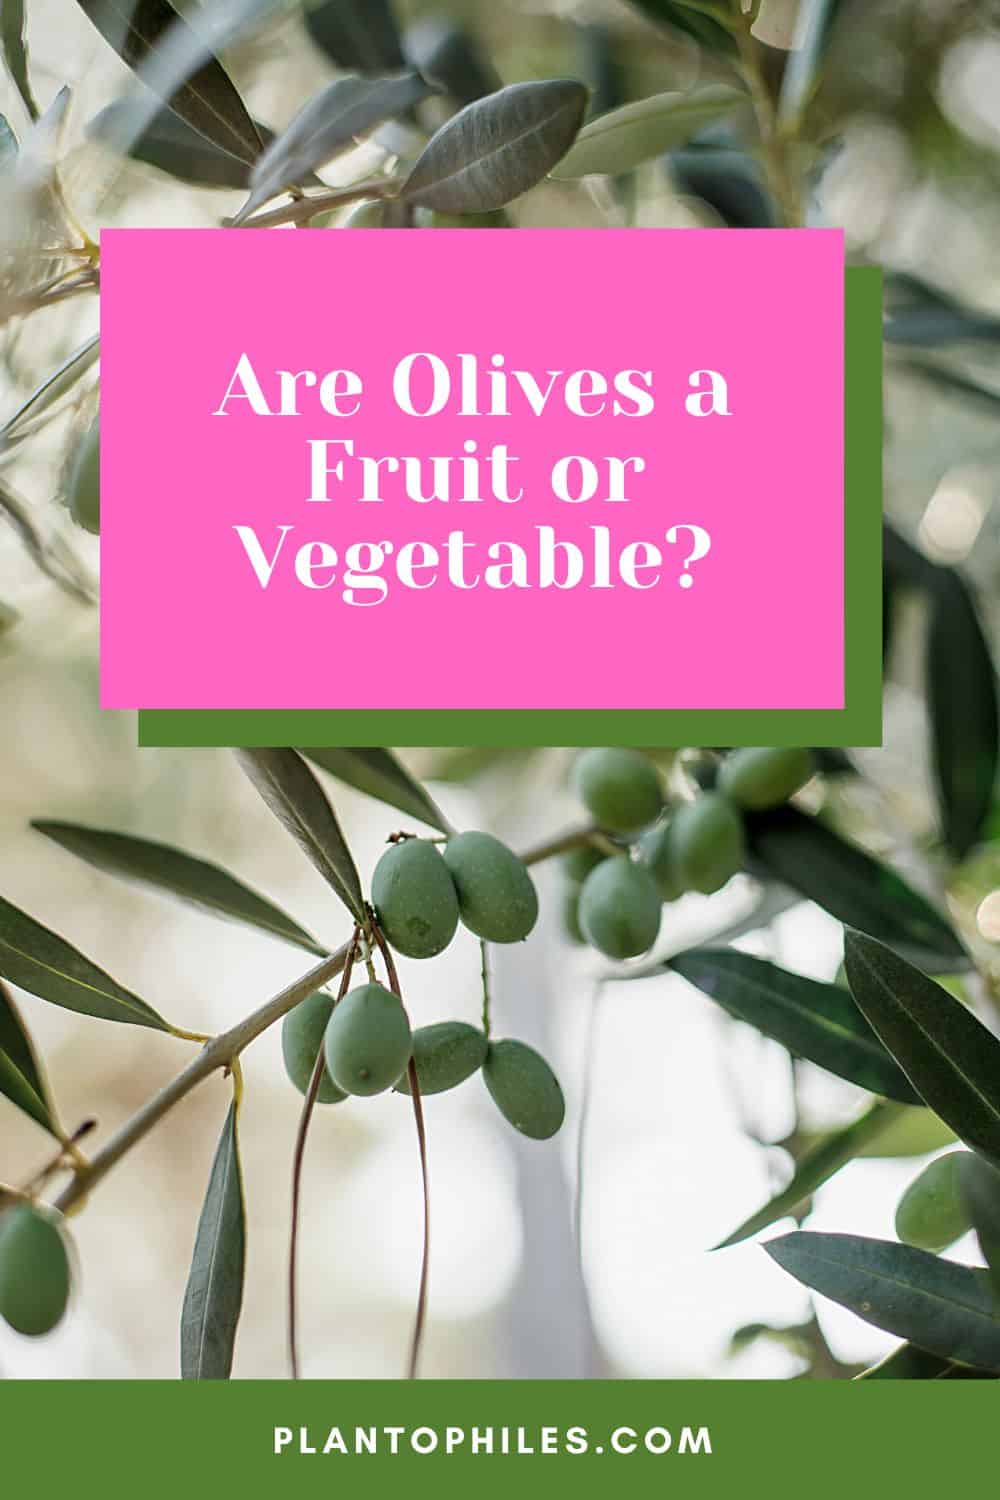 Are Olives a Fruit or a Vegetable?